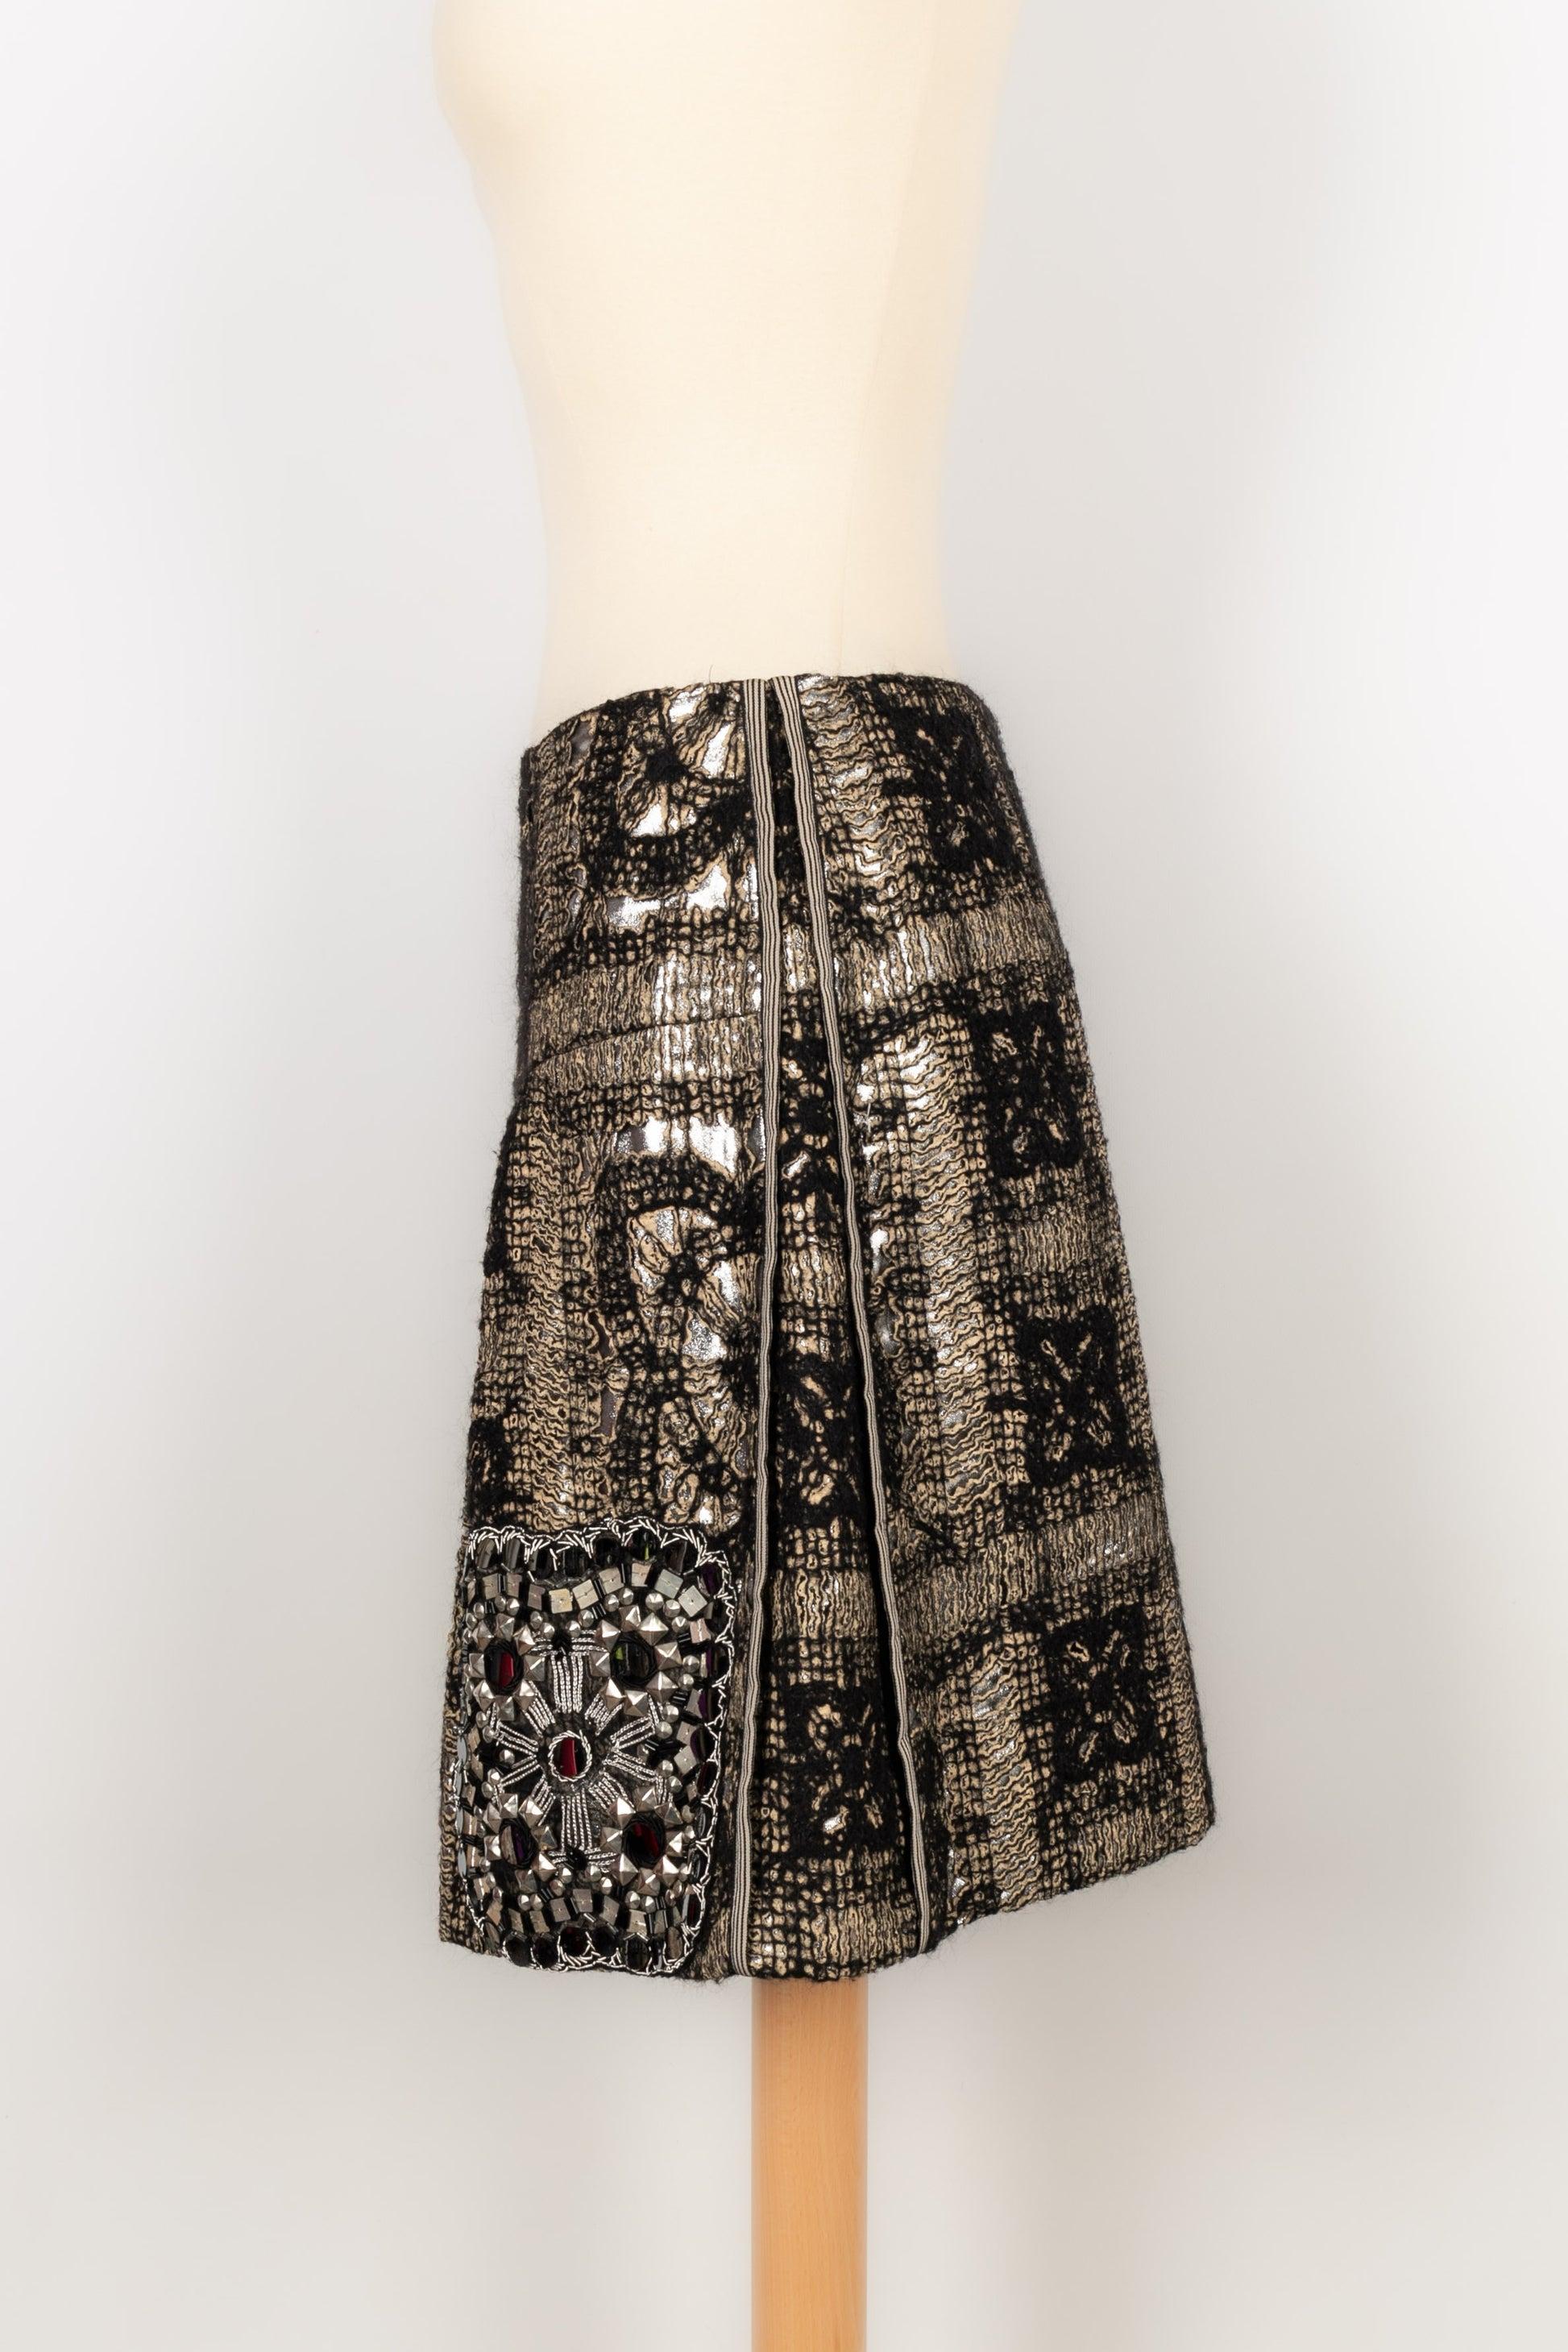 Christian Lacroix Blended Cotton and Mohair Wool Skirt, 2008 In Excellent Condition For Sale In SAINT-OUEN-SUR-SEINE, FR